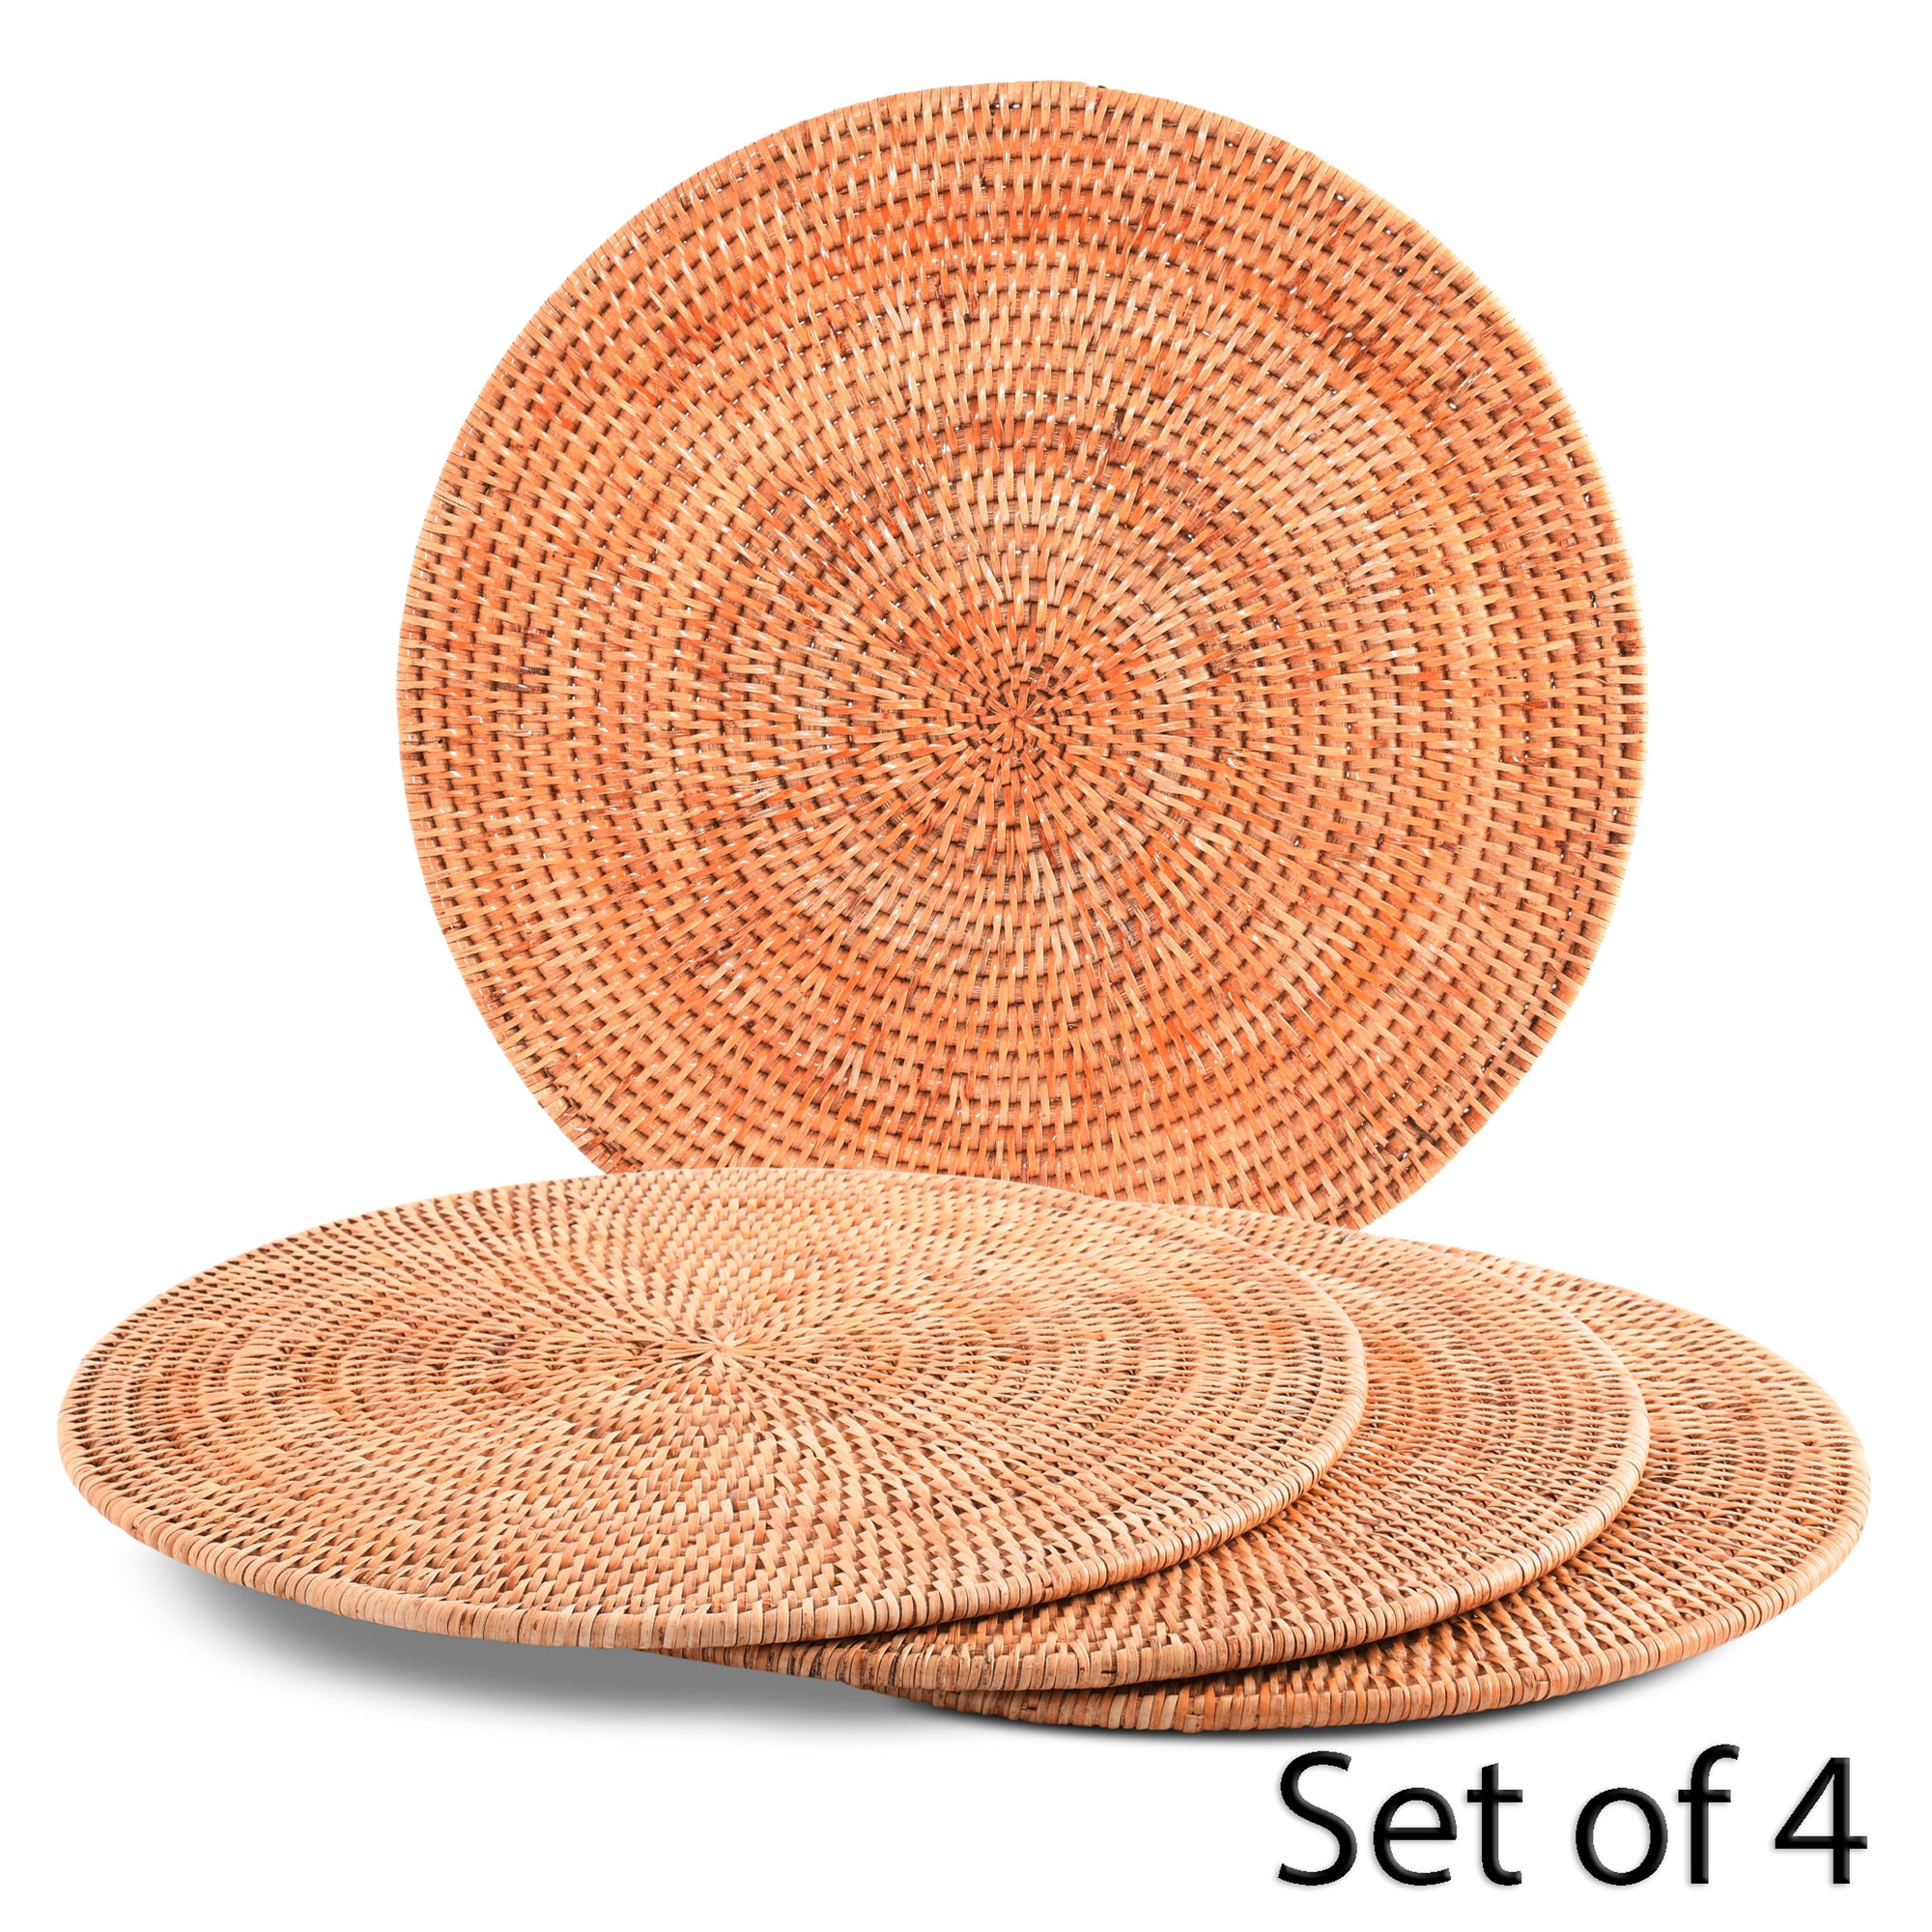 Vagabond House Hand Woven Wicker Rattan Round Placemat - Set of 4 Product Image